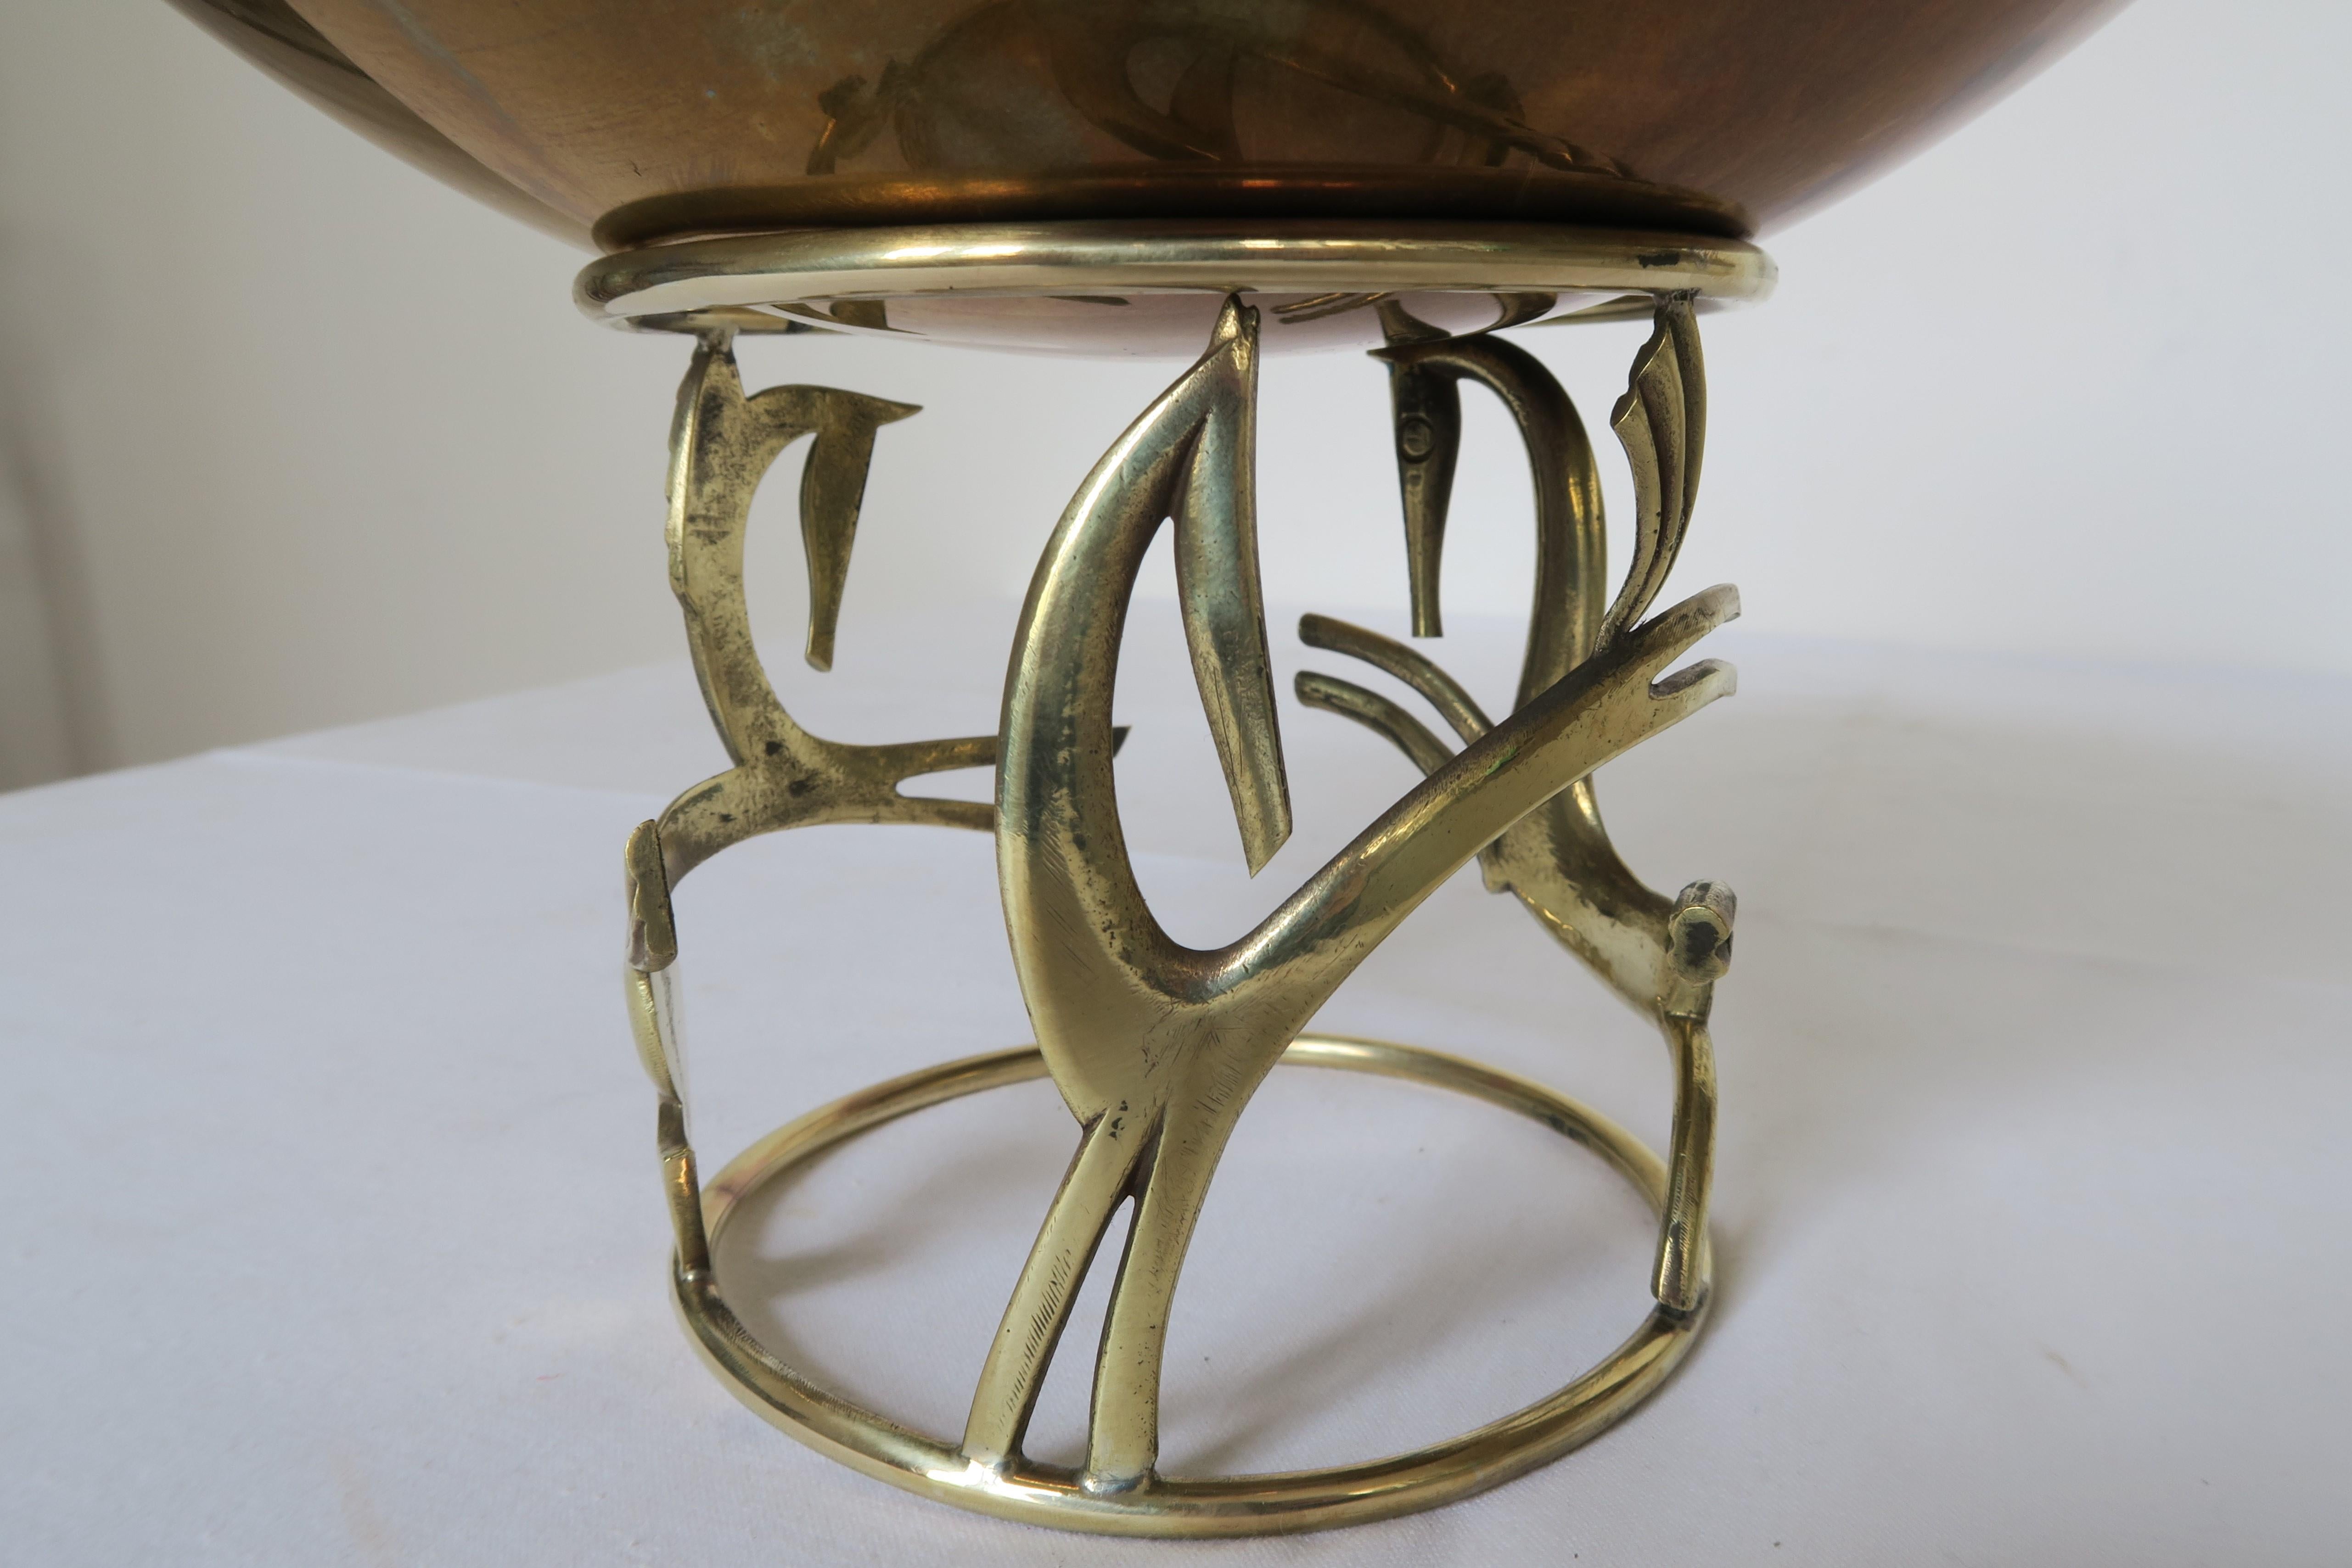 In this ad you find a fine example of Art Nouveau design. For sale is a beautiful brass bowl designed and manufactured by the renowned Wiener Werkstätte Hagenauer. The base is embellished with stylized horse ornaments that are dynamically roaming